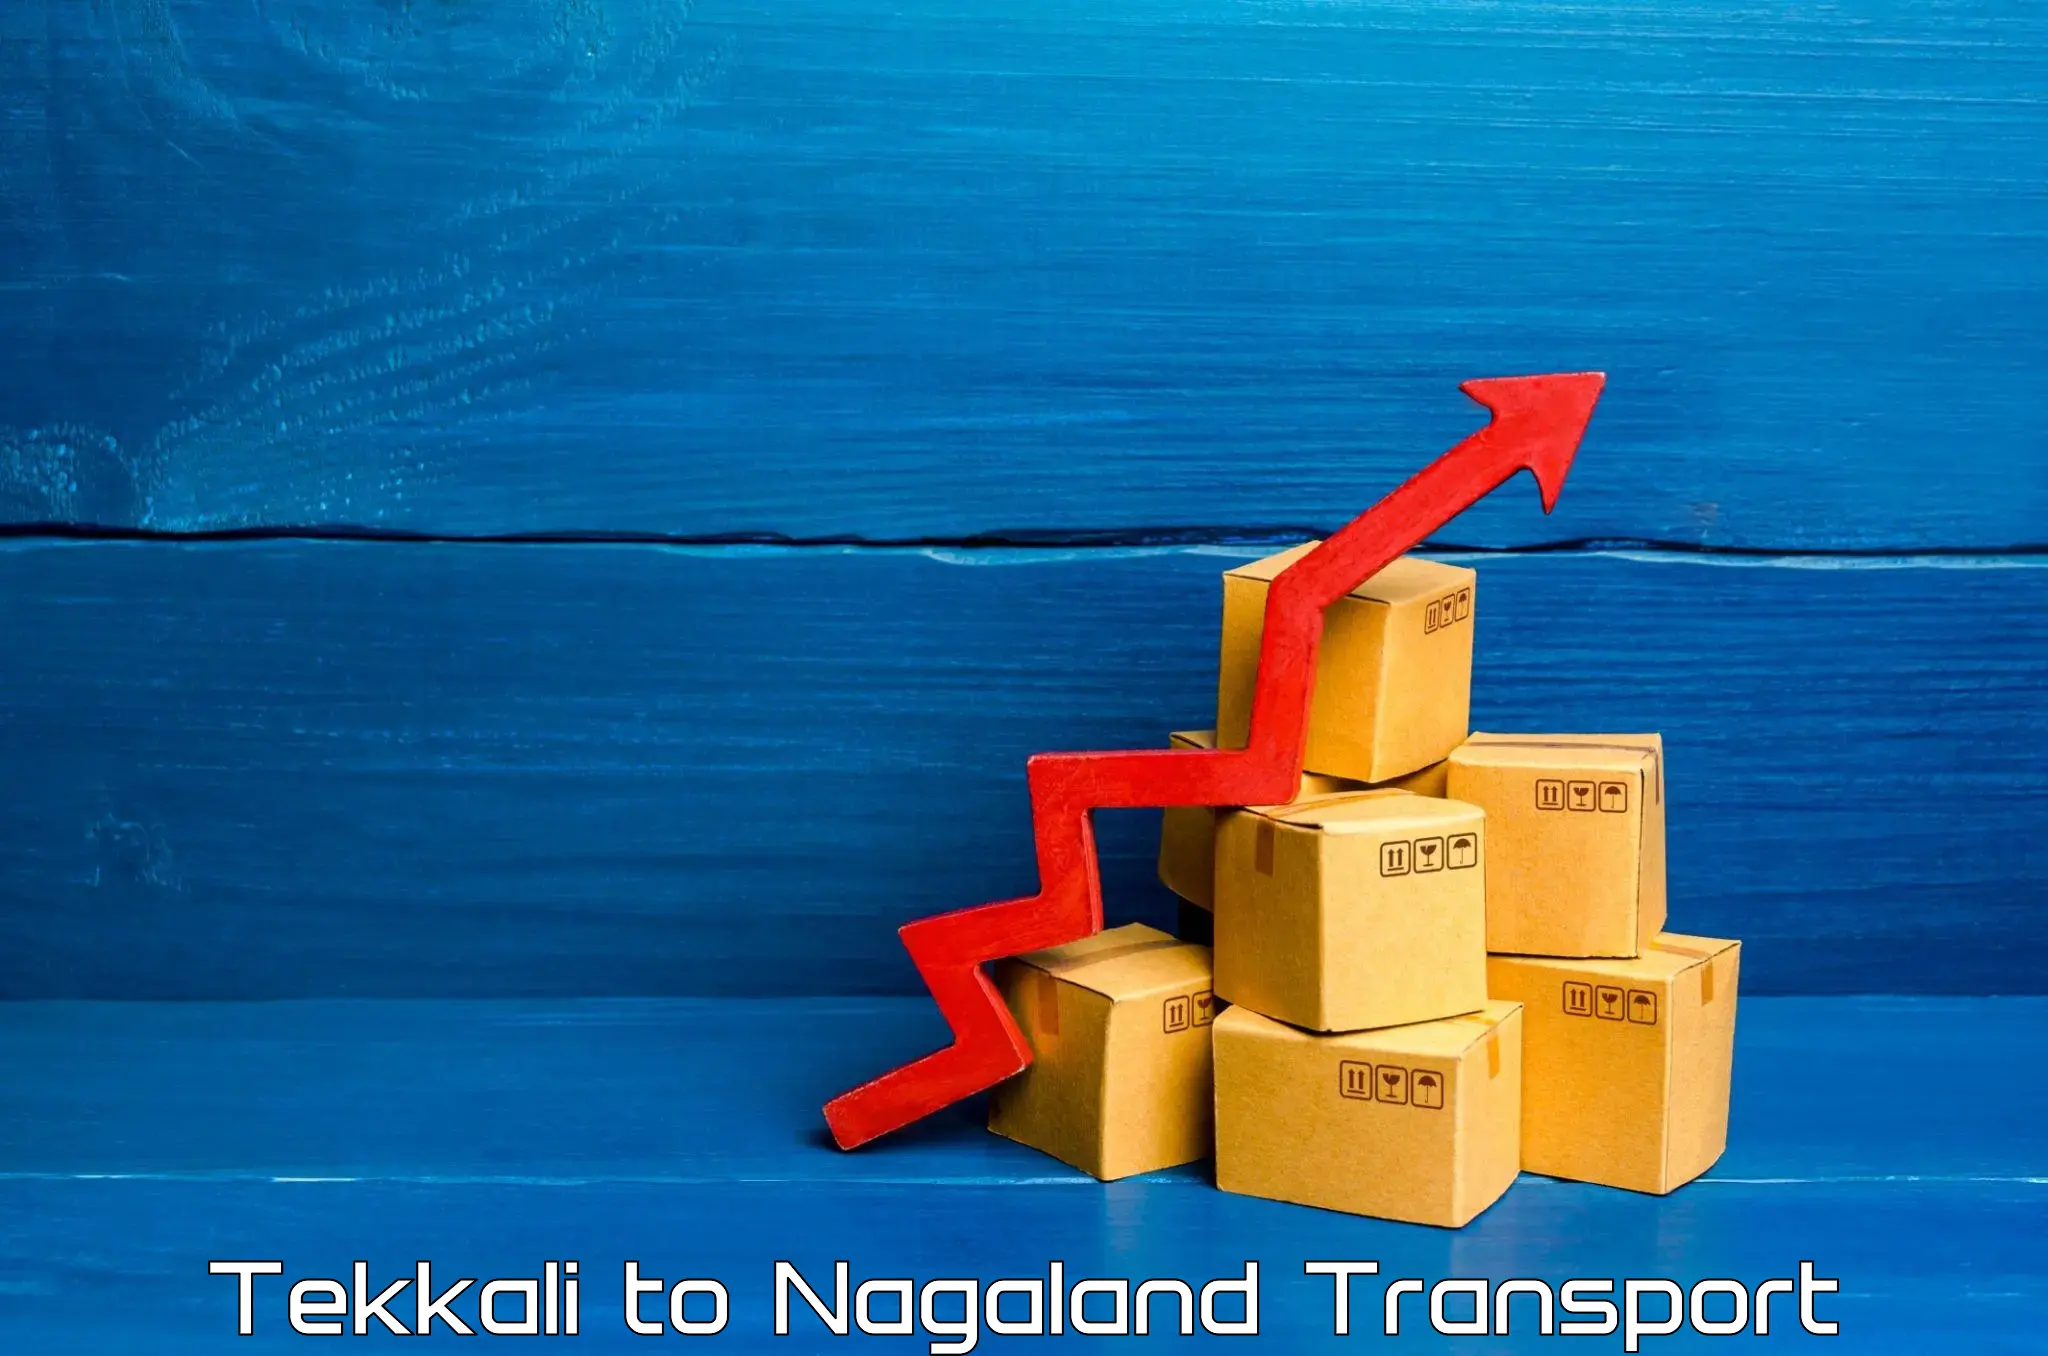 Container transport service Tekkali to Nagaland